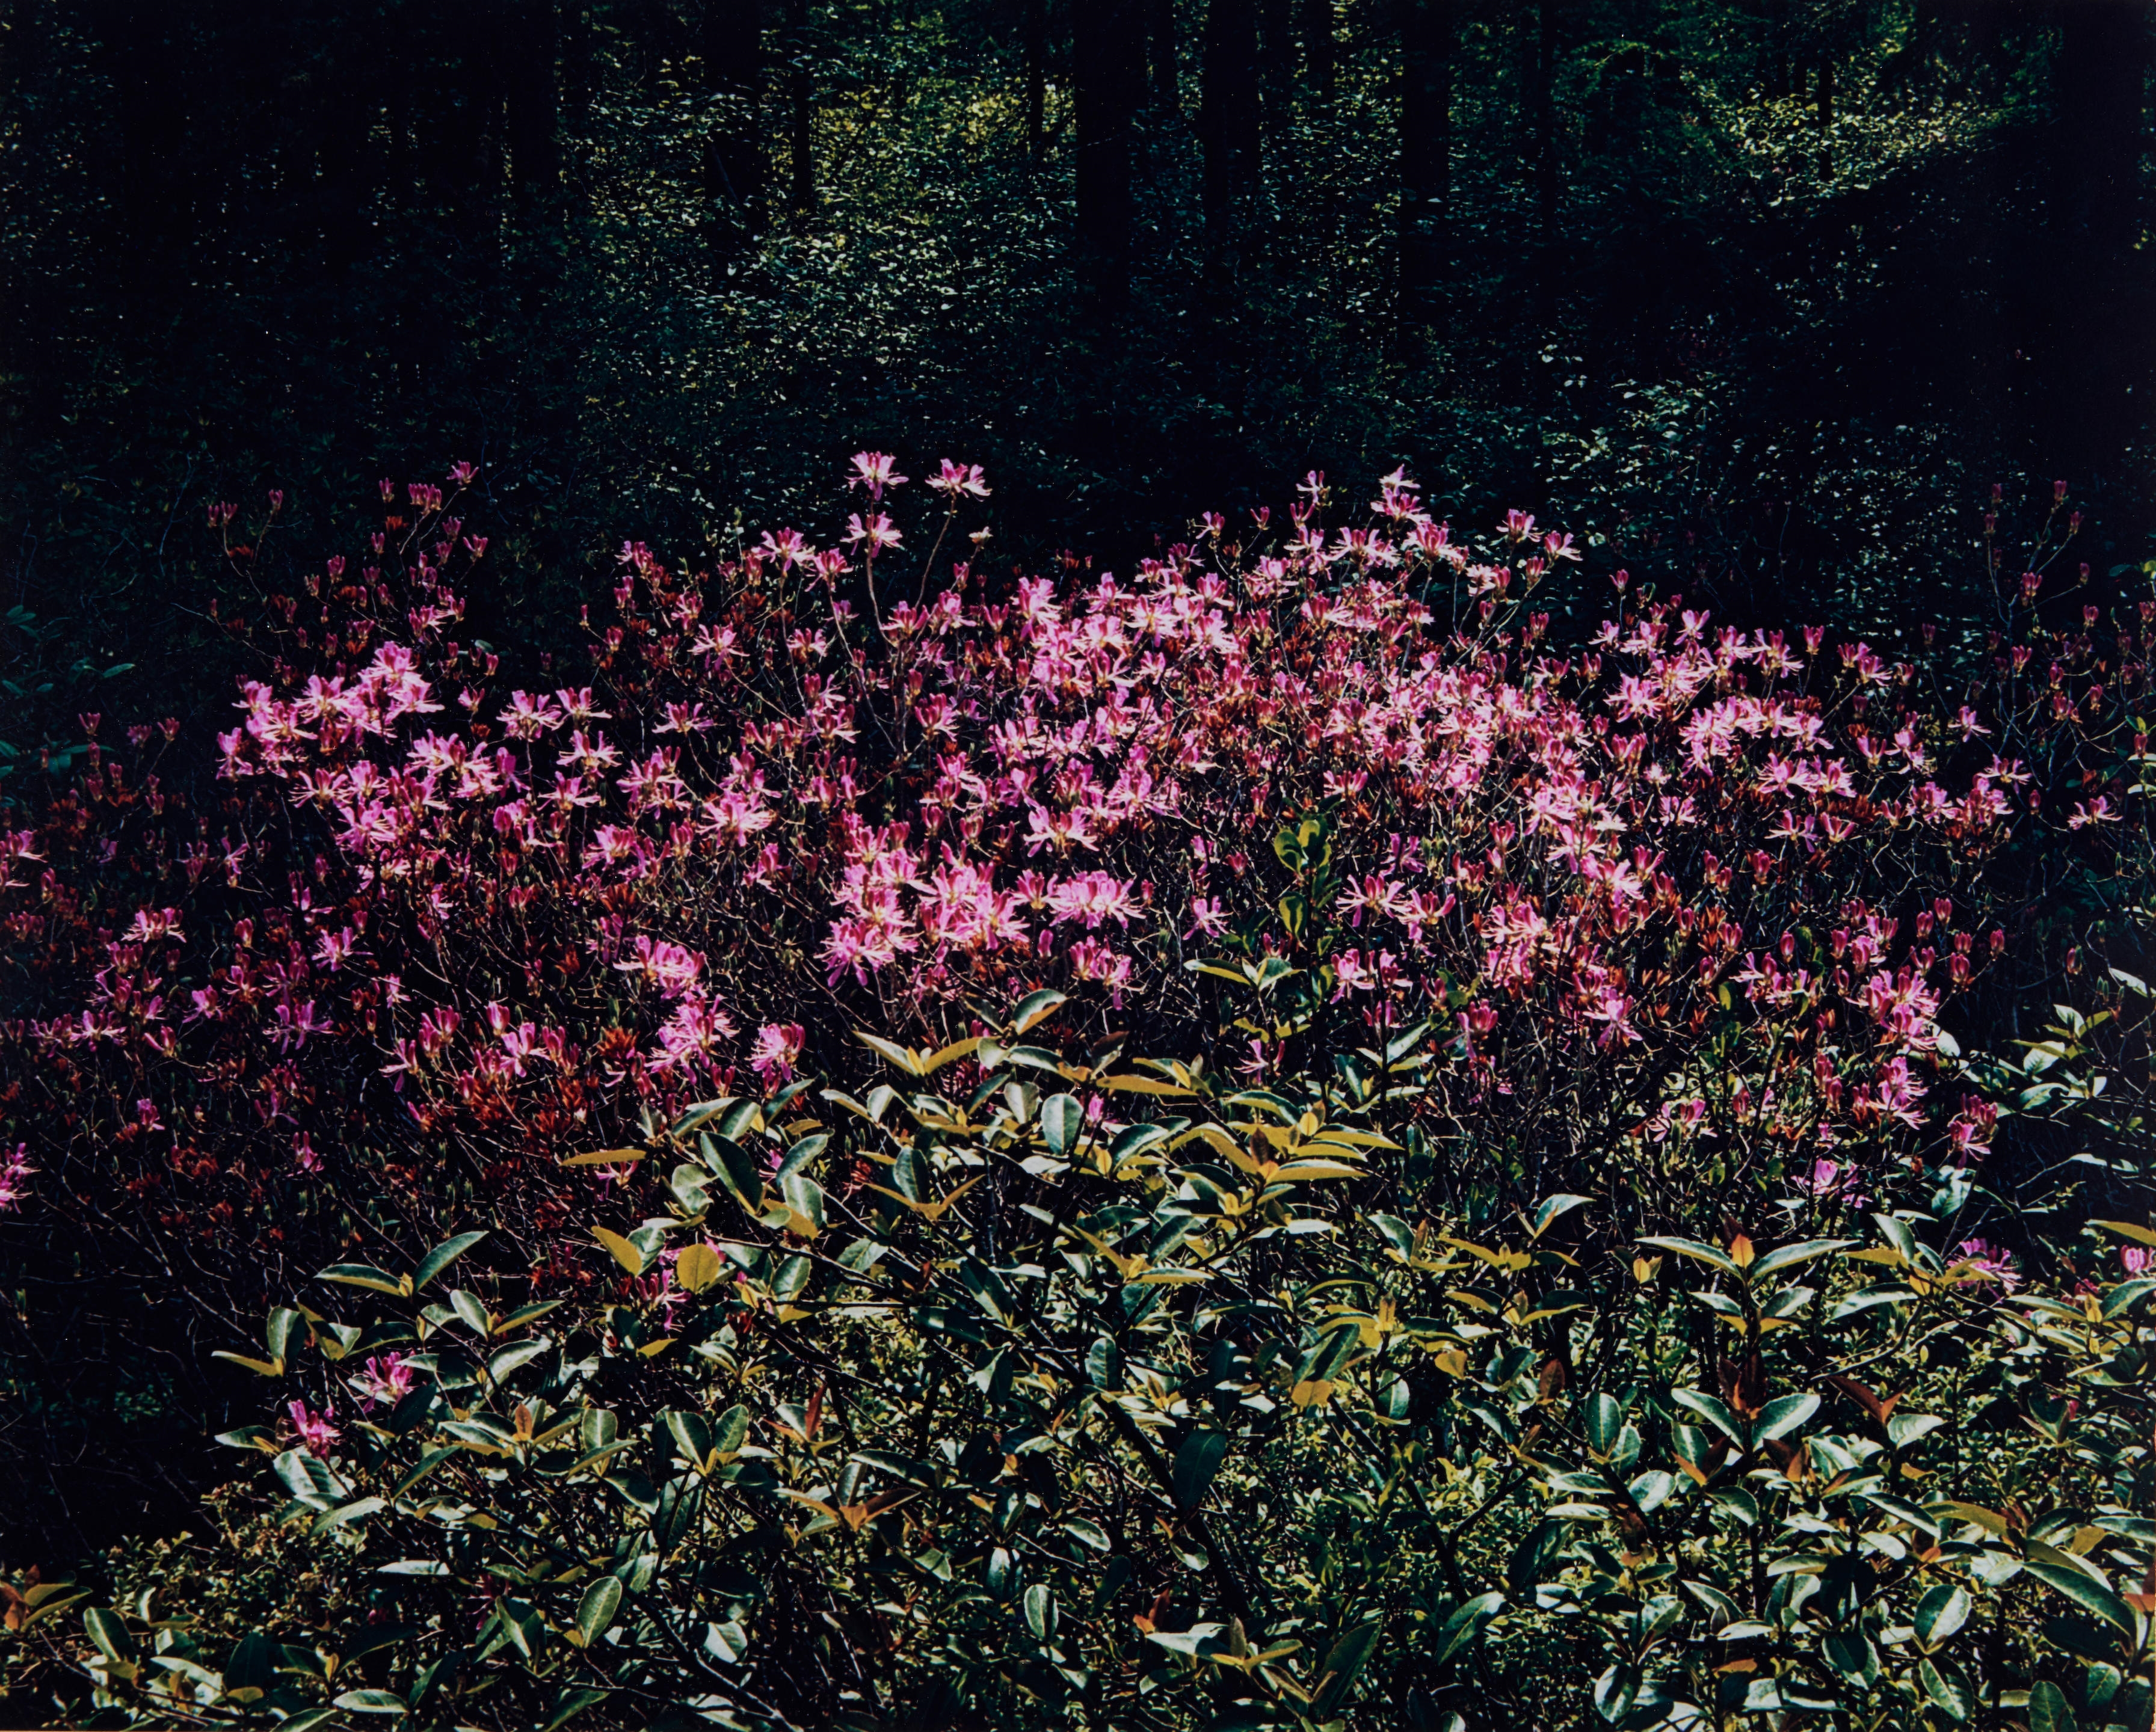 Rhodora, New Hampshire from the portfolio The Seasons by Eliot Porter, printed 1963